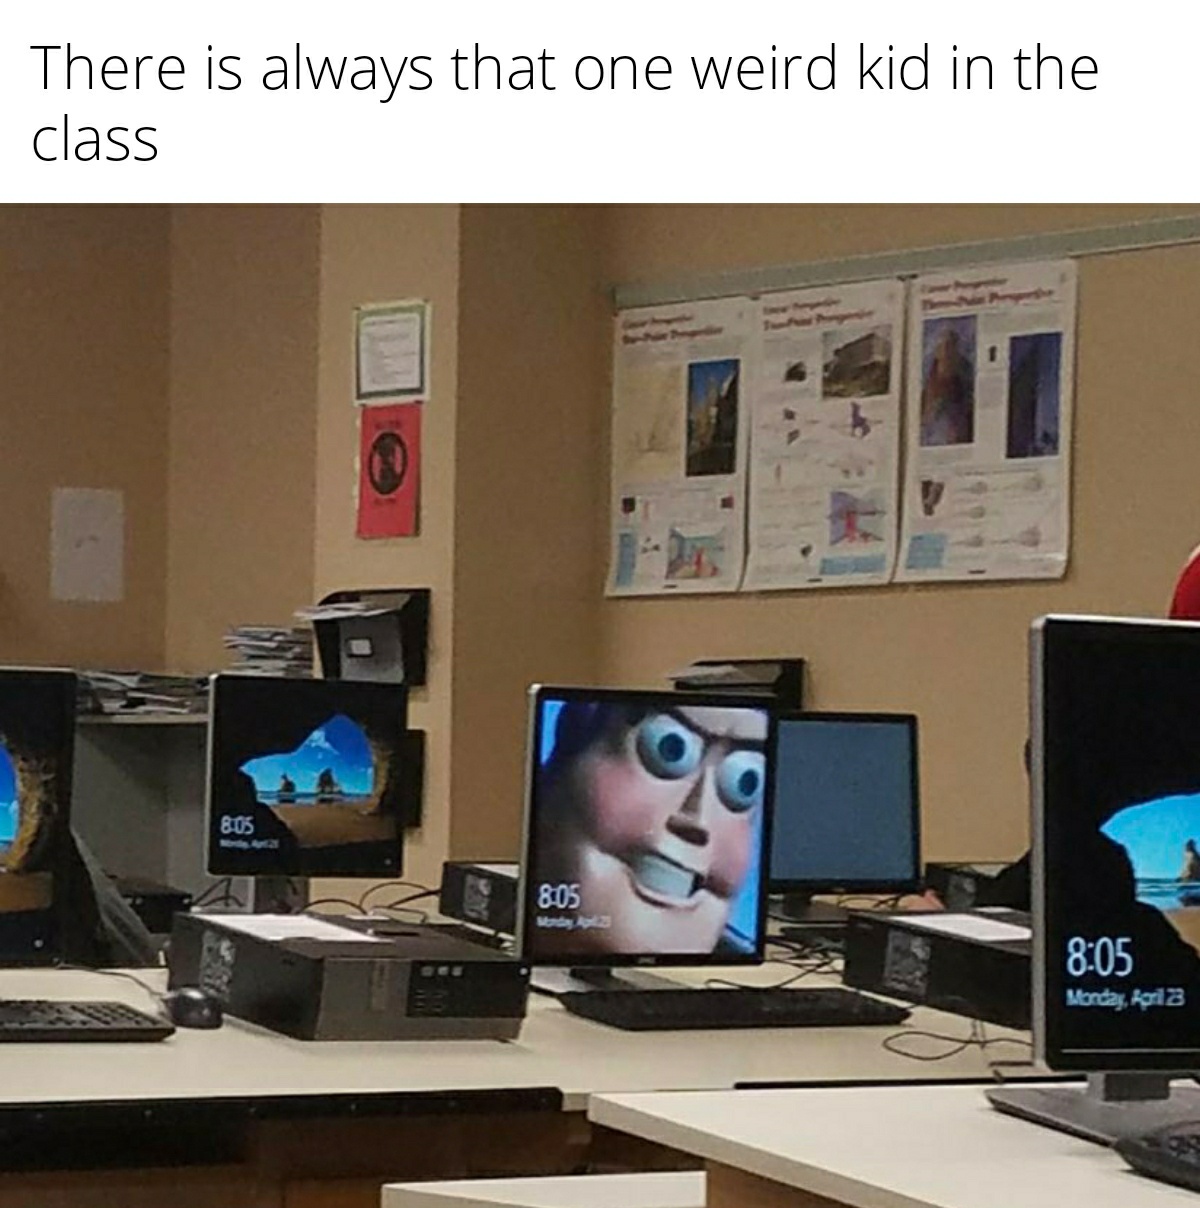 dank memes - Internet meme - There is always that one weird kid in the class 805 805 Mbrday, kola